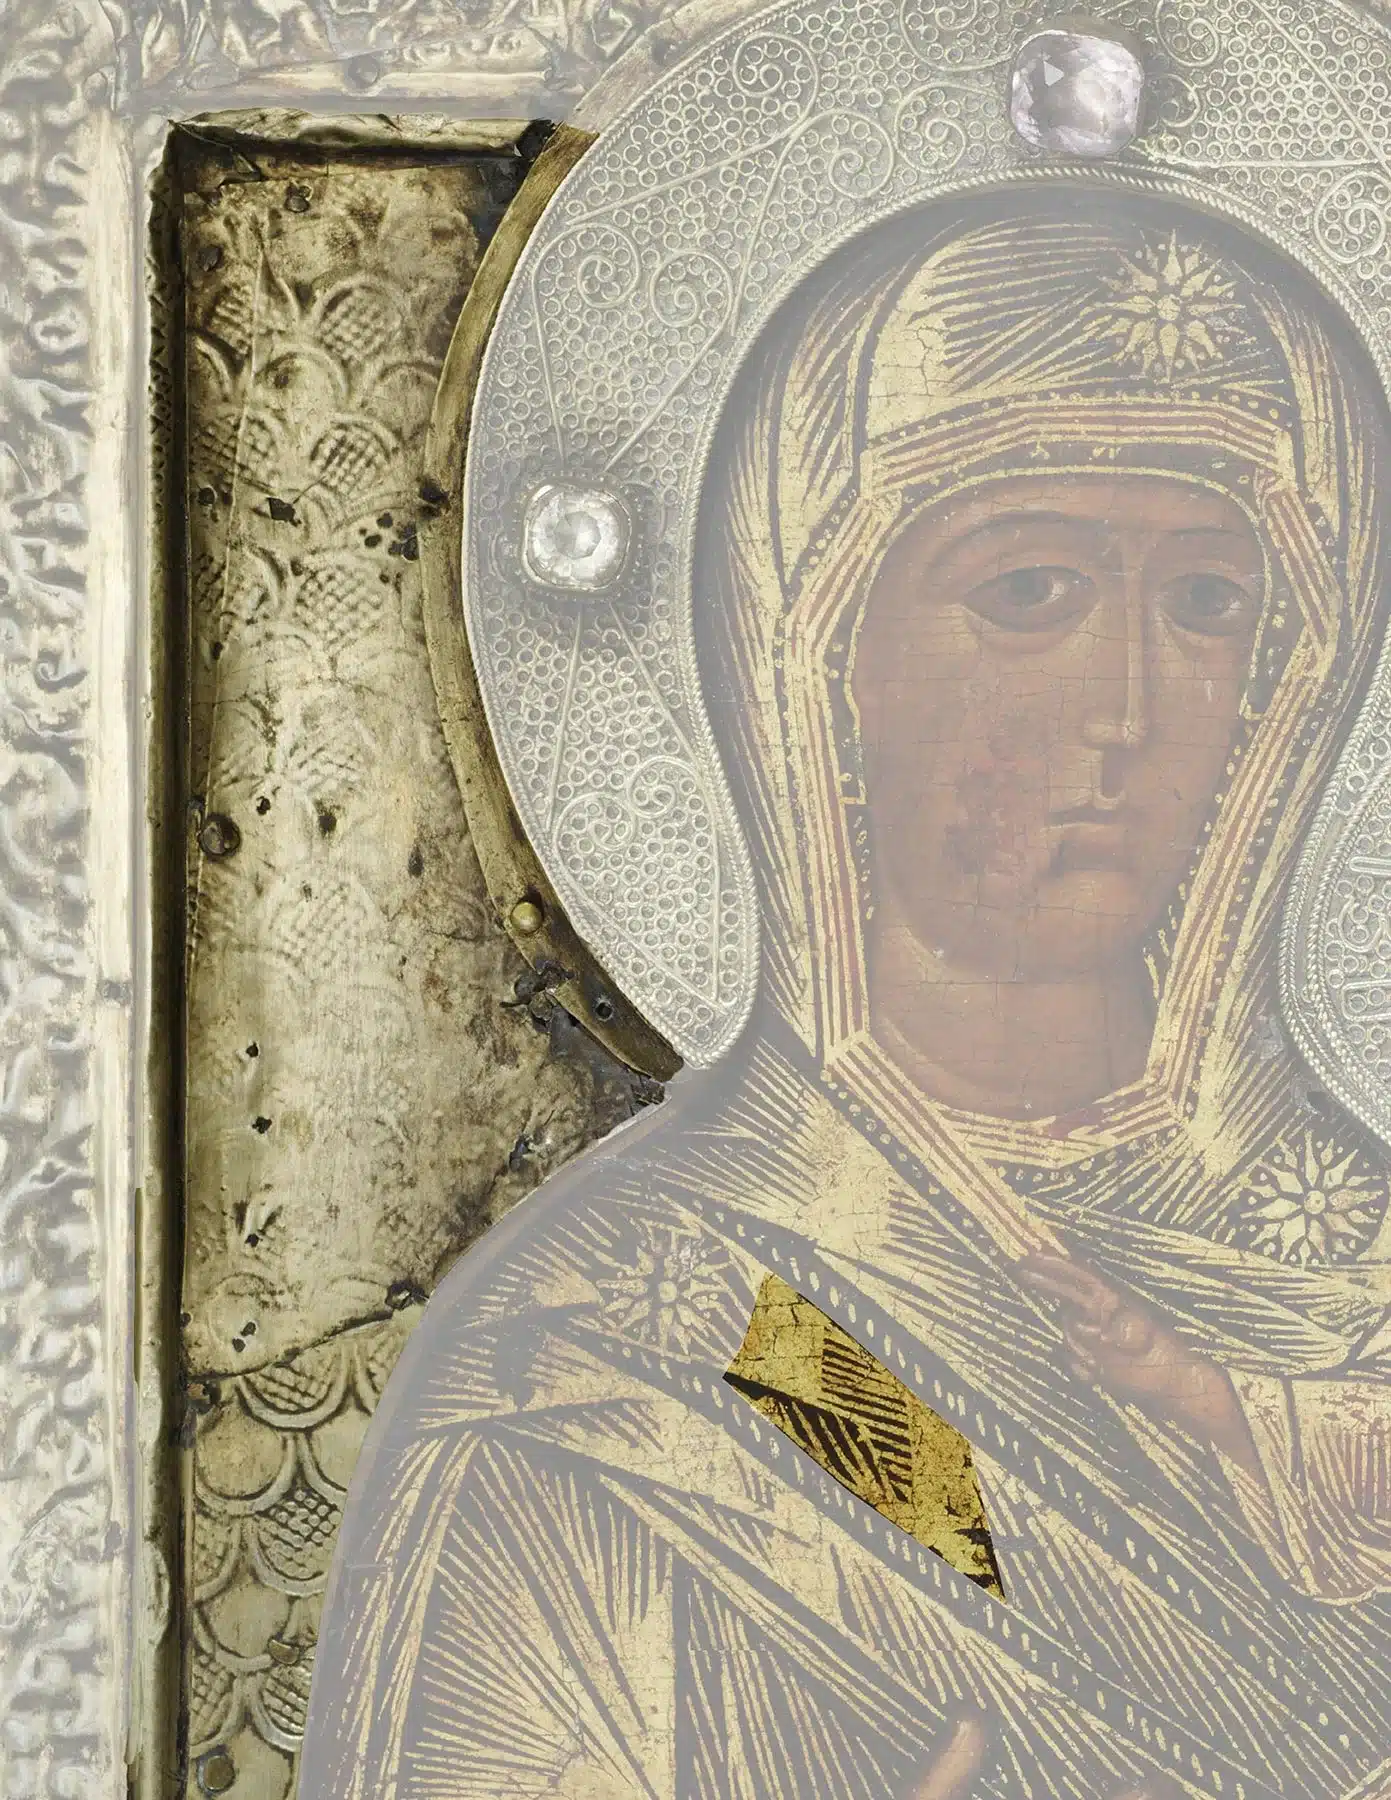 Anatomy of an Icon Gilding/Assist